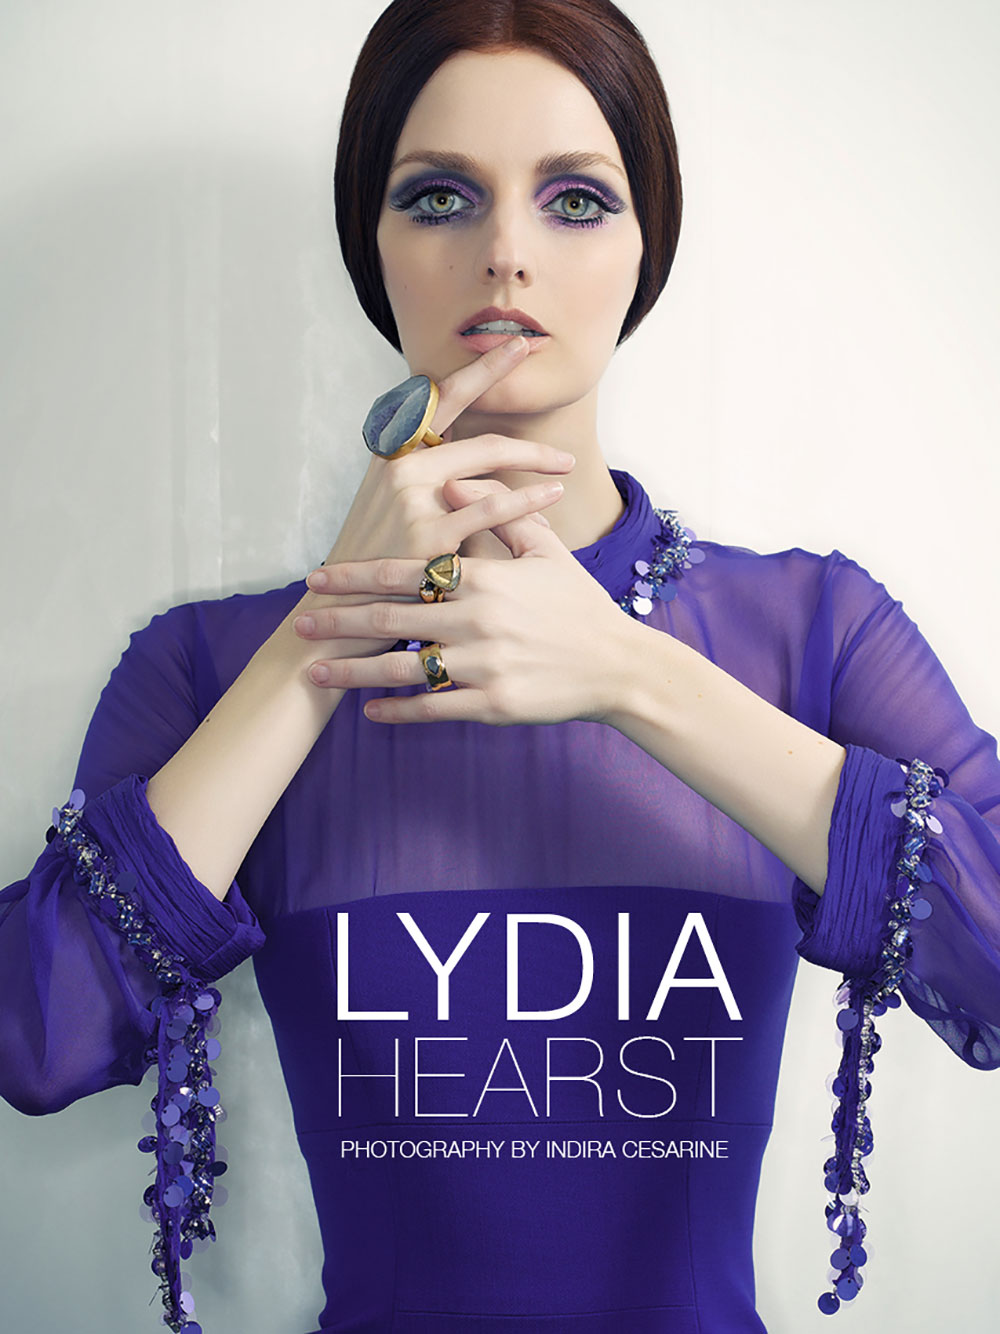 MODEL, ACTRESS, AND PHILANTRHOPIST LYDIA HEARST ON HOW TO ACHIEVE YOUR  DREAMS - THE #GIRLPOWER ISSUE